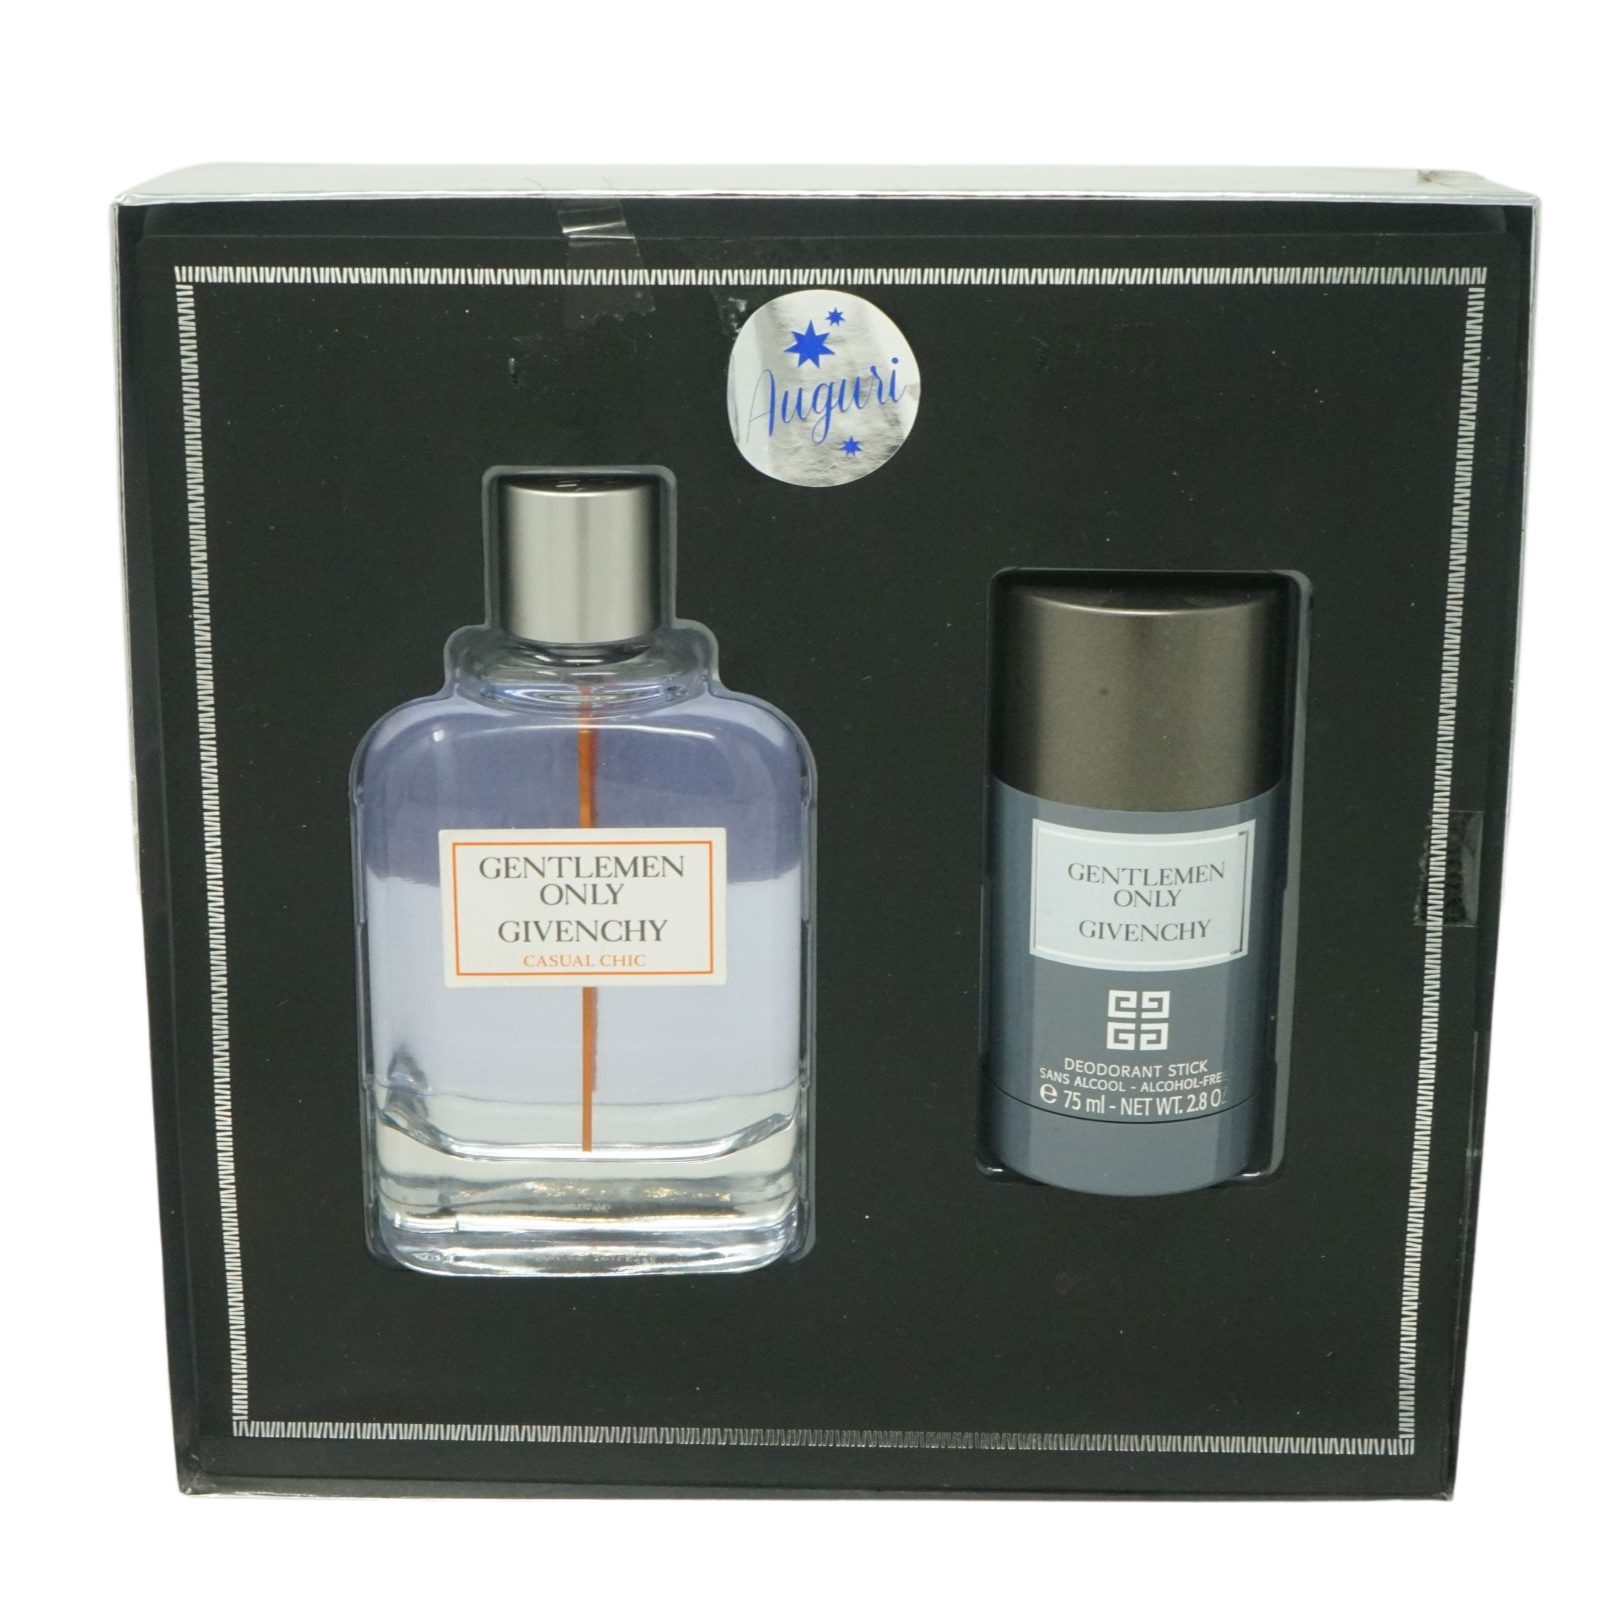 Only Casual ml Toilette GIVENCHY 100 Gentleman Eau de Givenchy Toilette Eau de